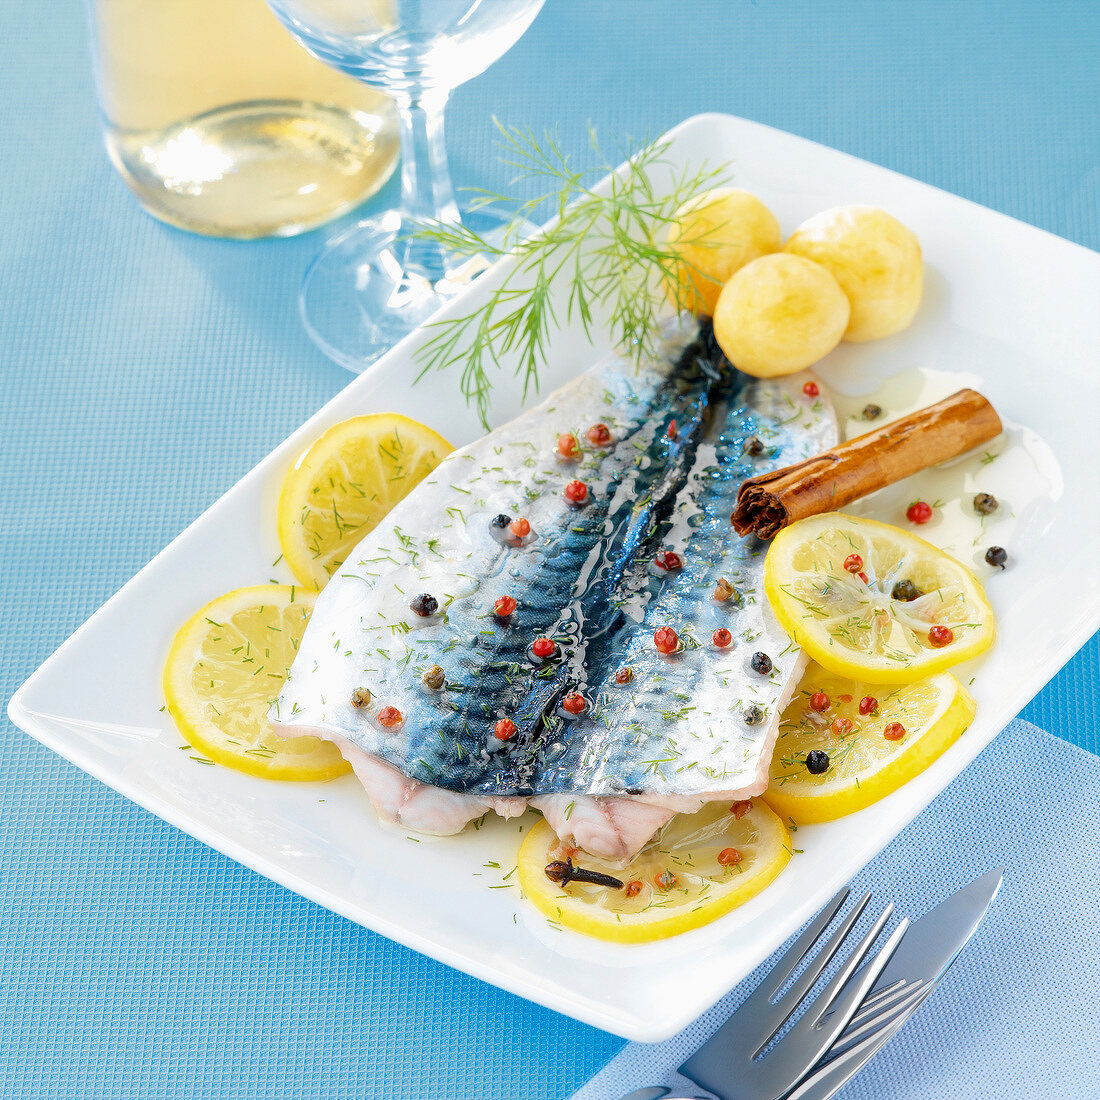 Mackerel marinated with lemon and spices